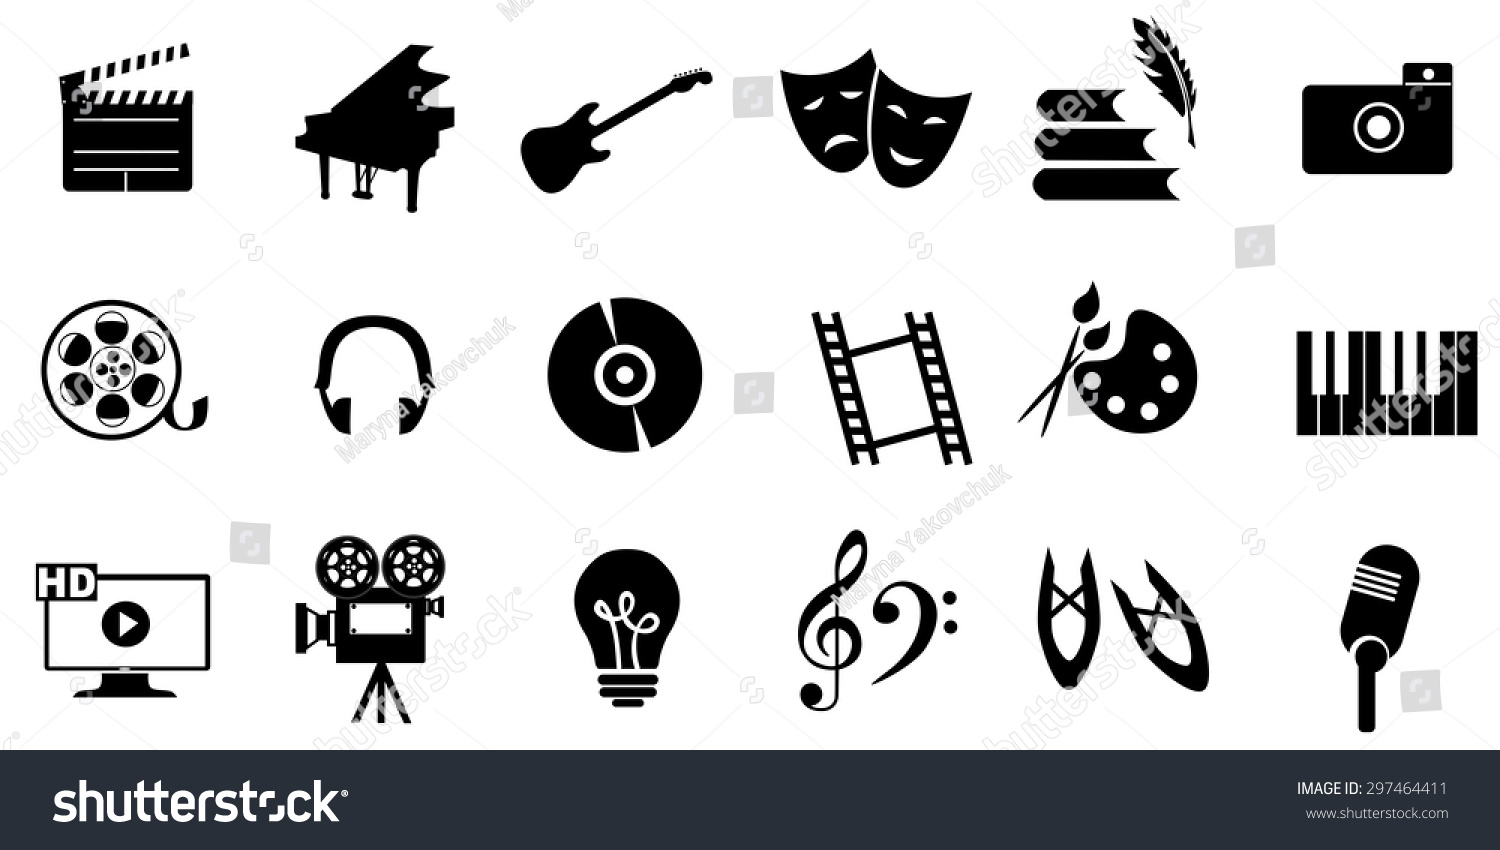 SVG of 
set of icons dedicated to arts: painting, music, literature, ballet, theater and cinema.
 svg